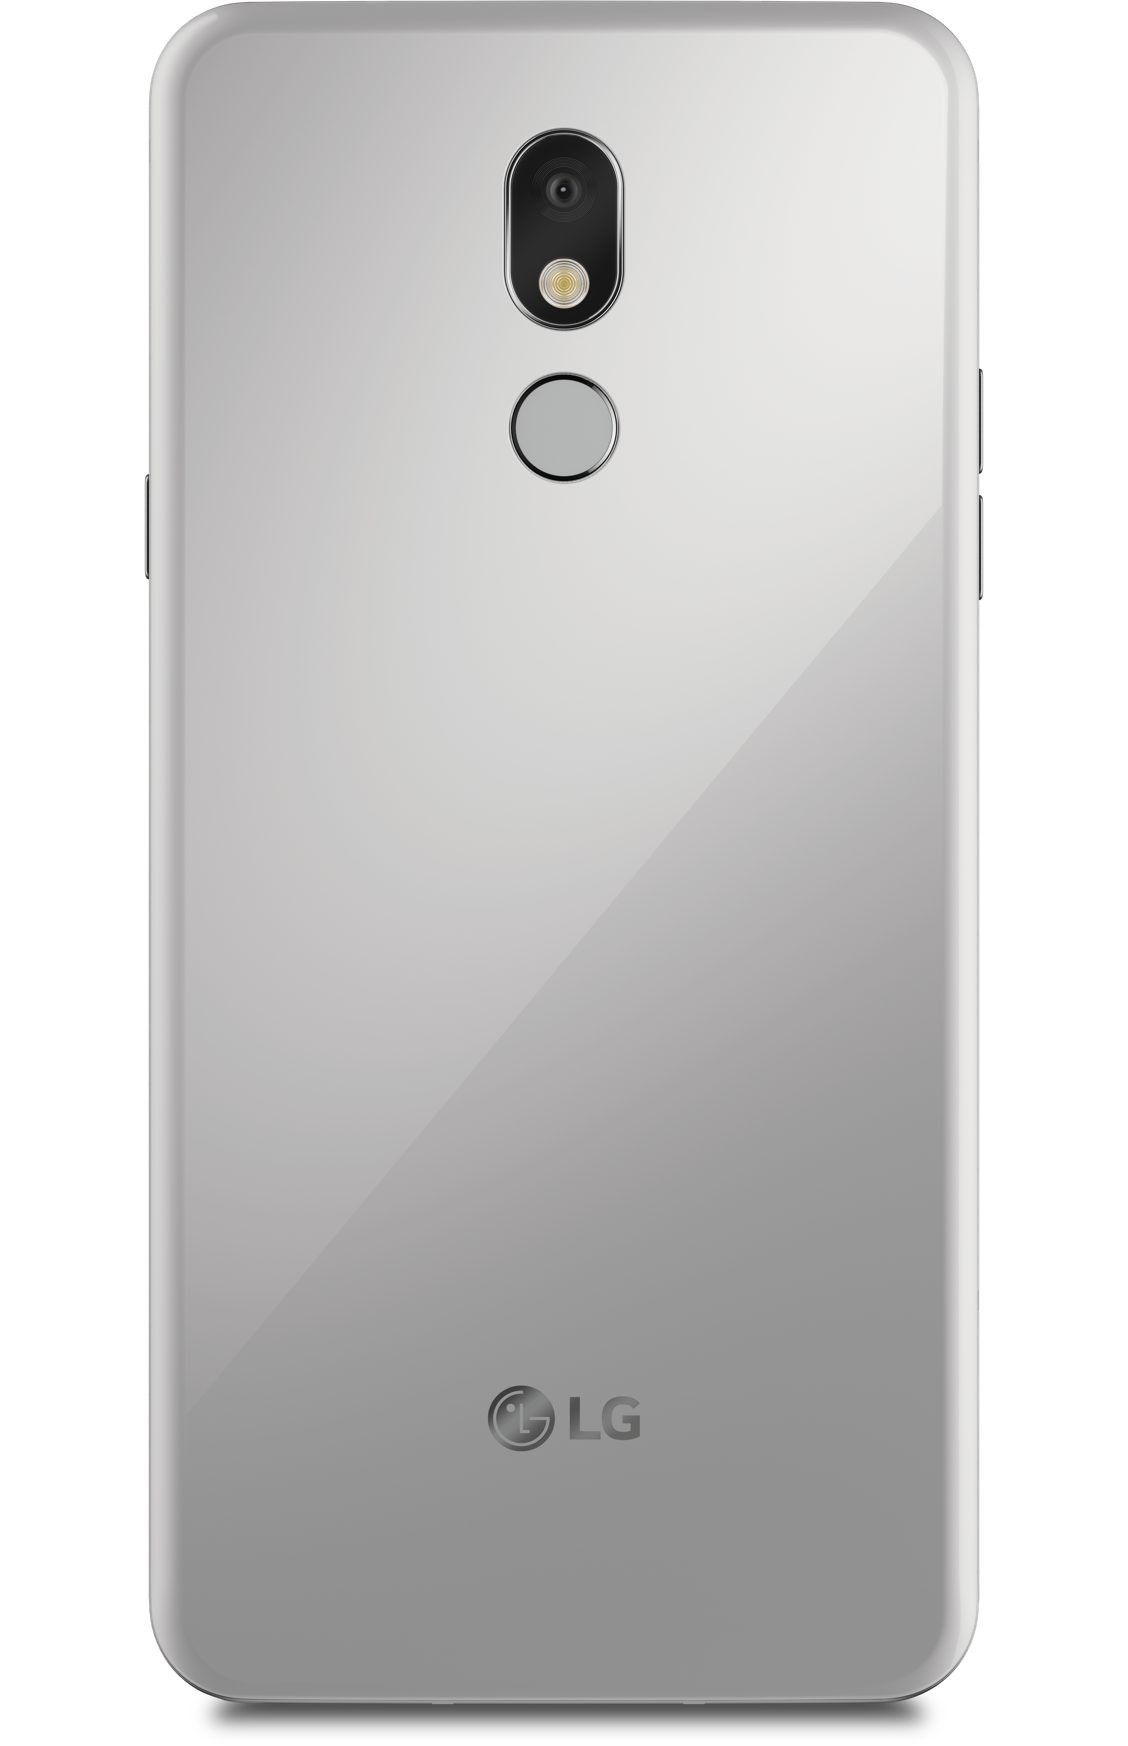 Barely used lg stylo 5 boost phone